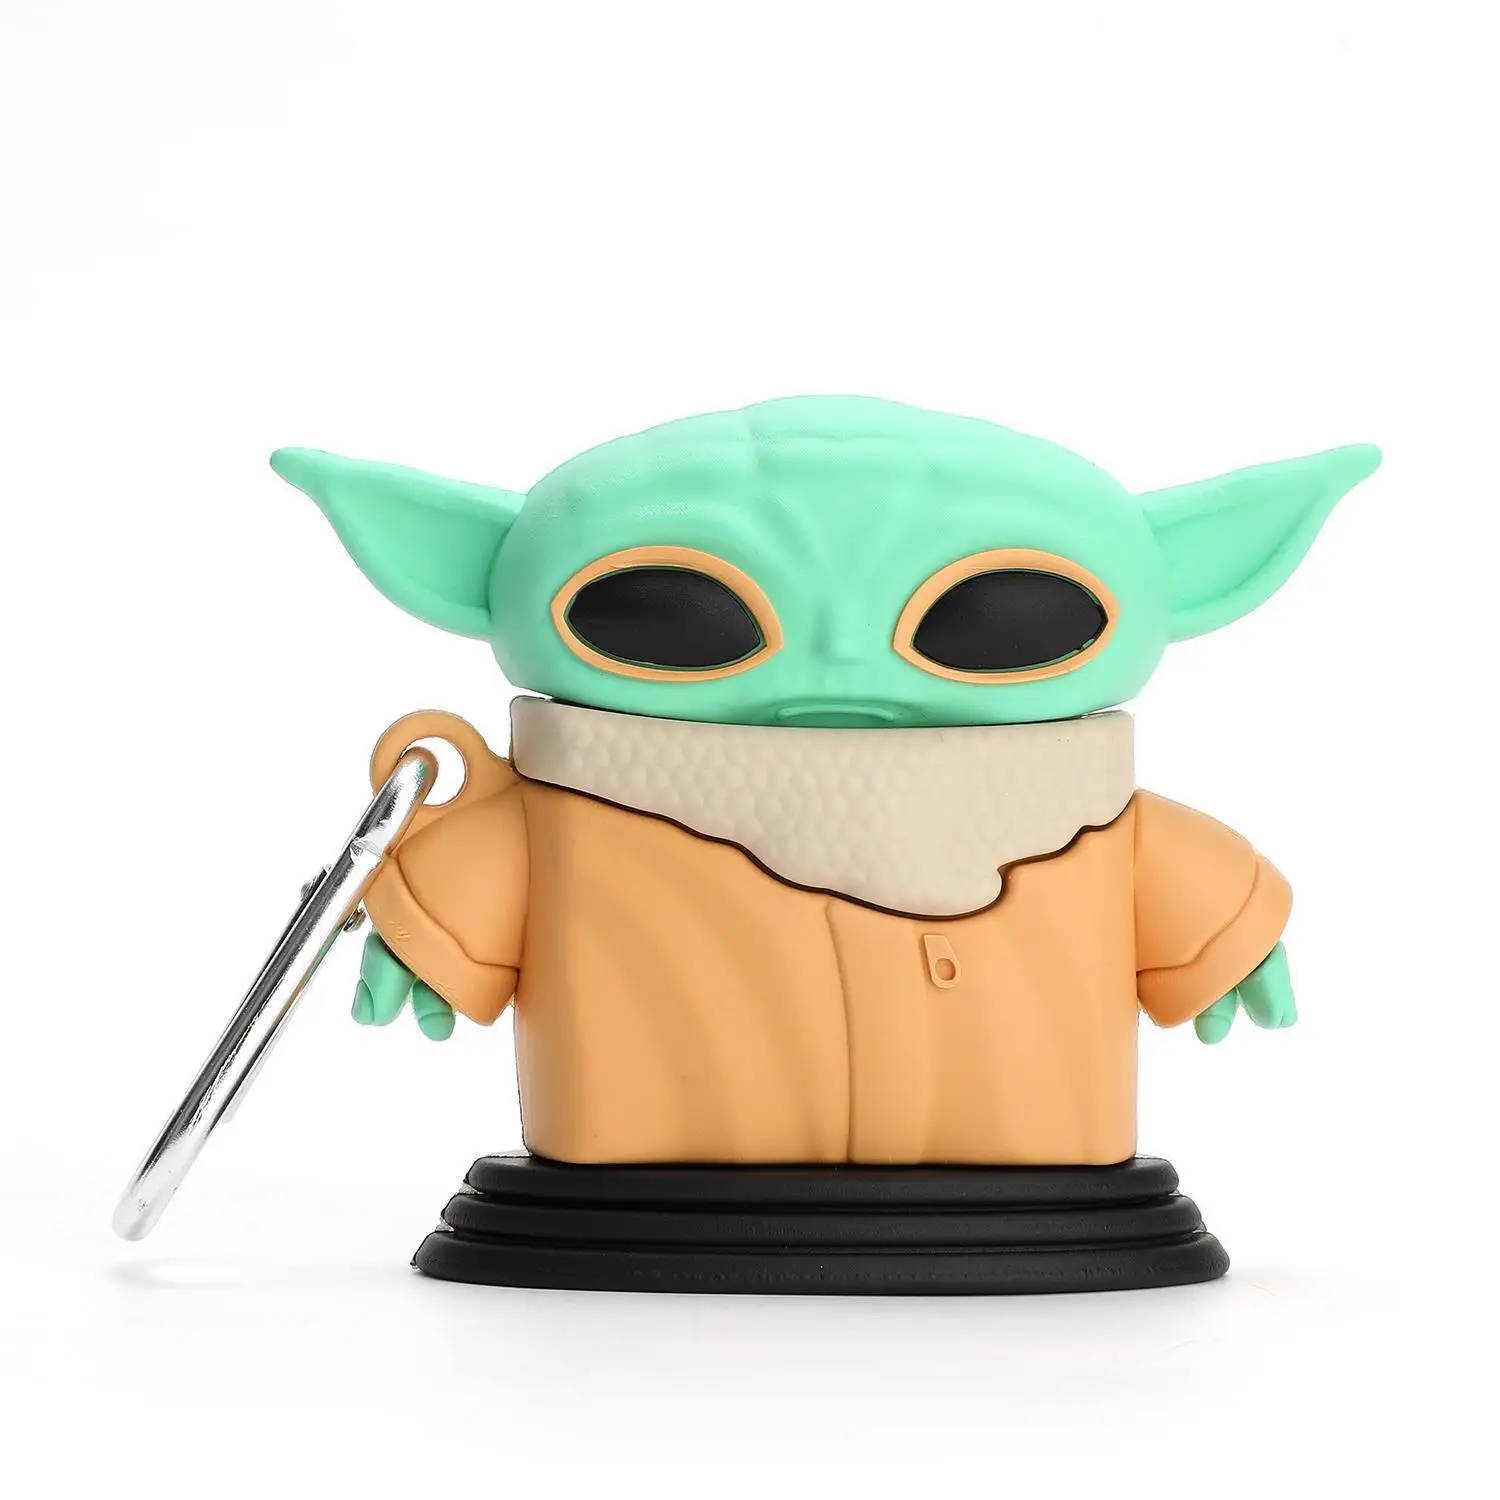 

Yoda Master Star 3D Silicone Wars Anime Movies Film Soft Cute Cover Case for AirPods Pro 1 2 3 Fashion Free Shipping, Green